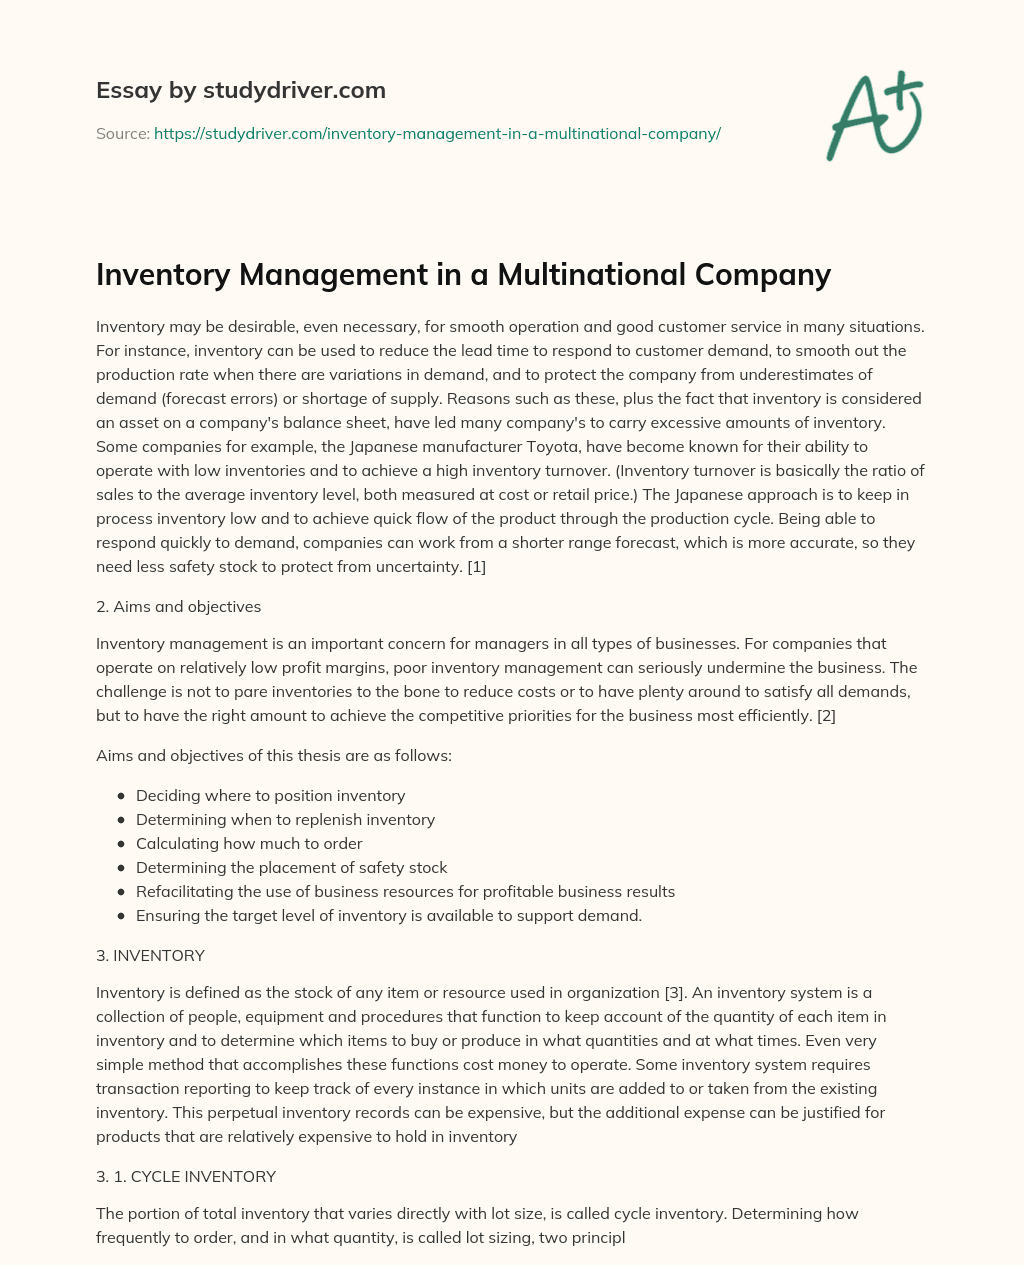 Inventory Management in a Multinational Company essay